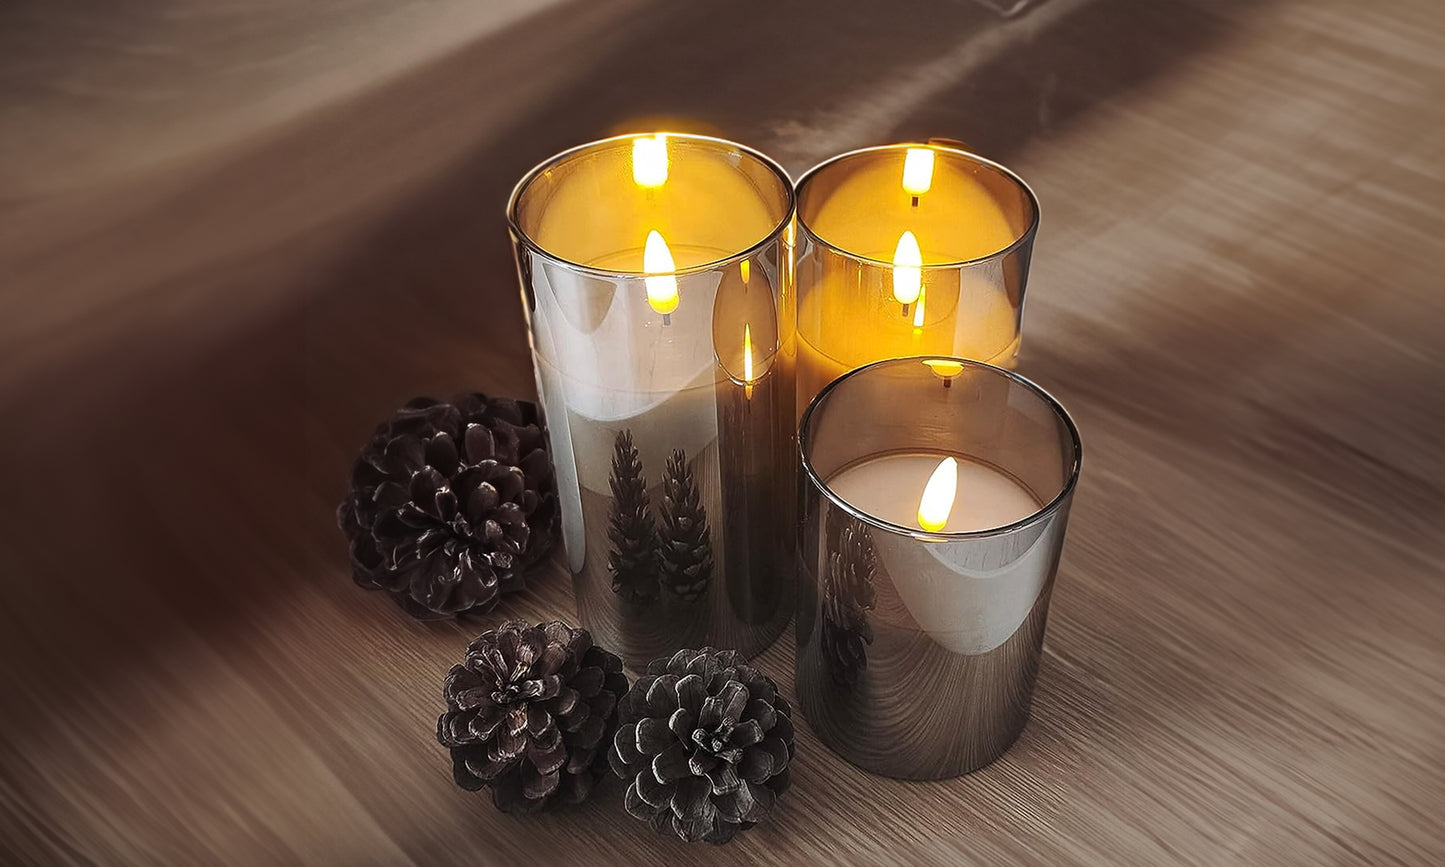 3pcs ShineTek Set of 3 Flameless Flickering LED Candles Electric Pillar Battery Candles Battery Powered Electric Candles with Remote and Timer